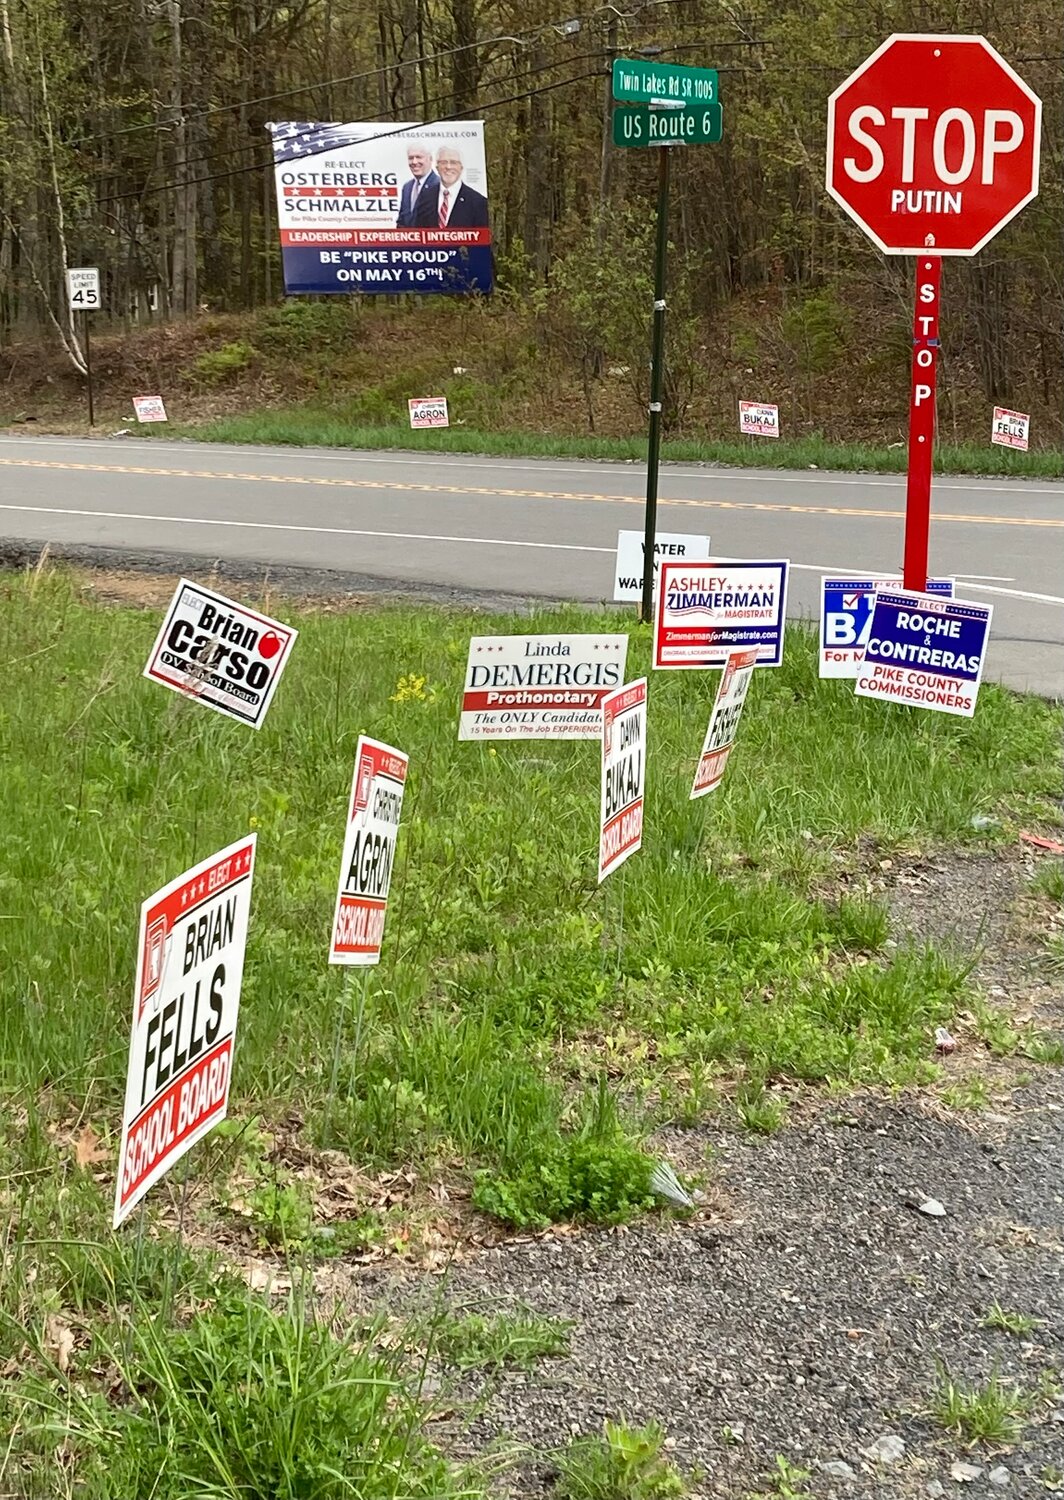 Between the school board, the commissioners', and the magistrate judge race, Pike County highways are aflush with politican signs. Voting will take place on May 16.